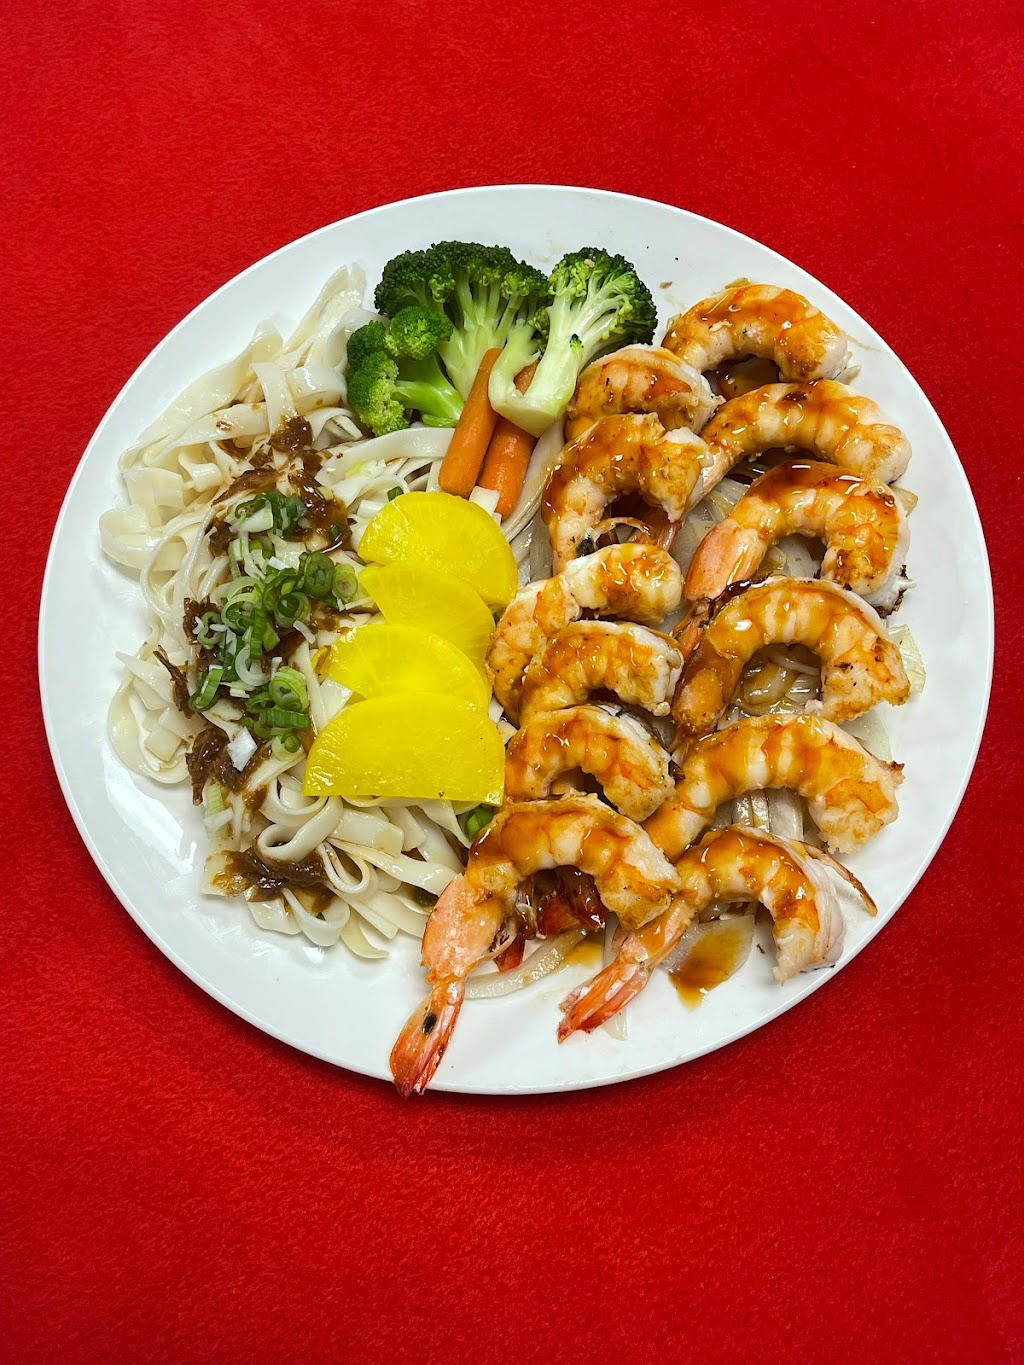 Teriyaki House Hagerstown | restaurant | 11205 John F Kennedy Dr Suite 204, Hagerstown, MD 21742, USA | 2408502768 OR +1 240-850-2768